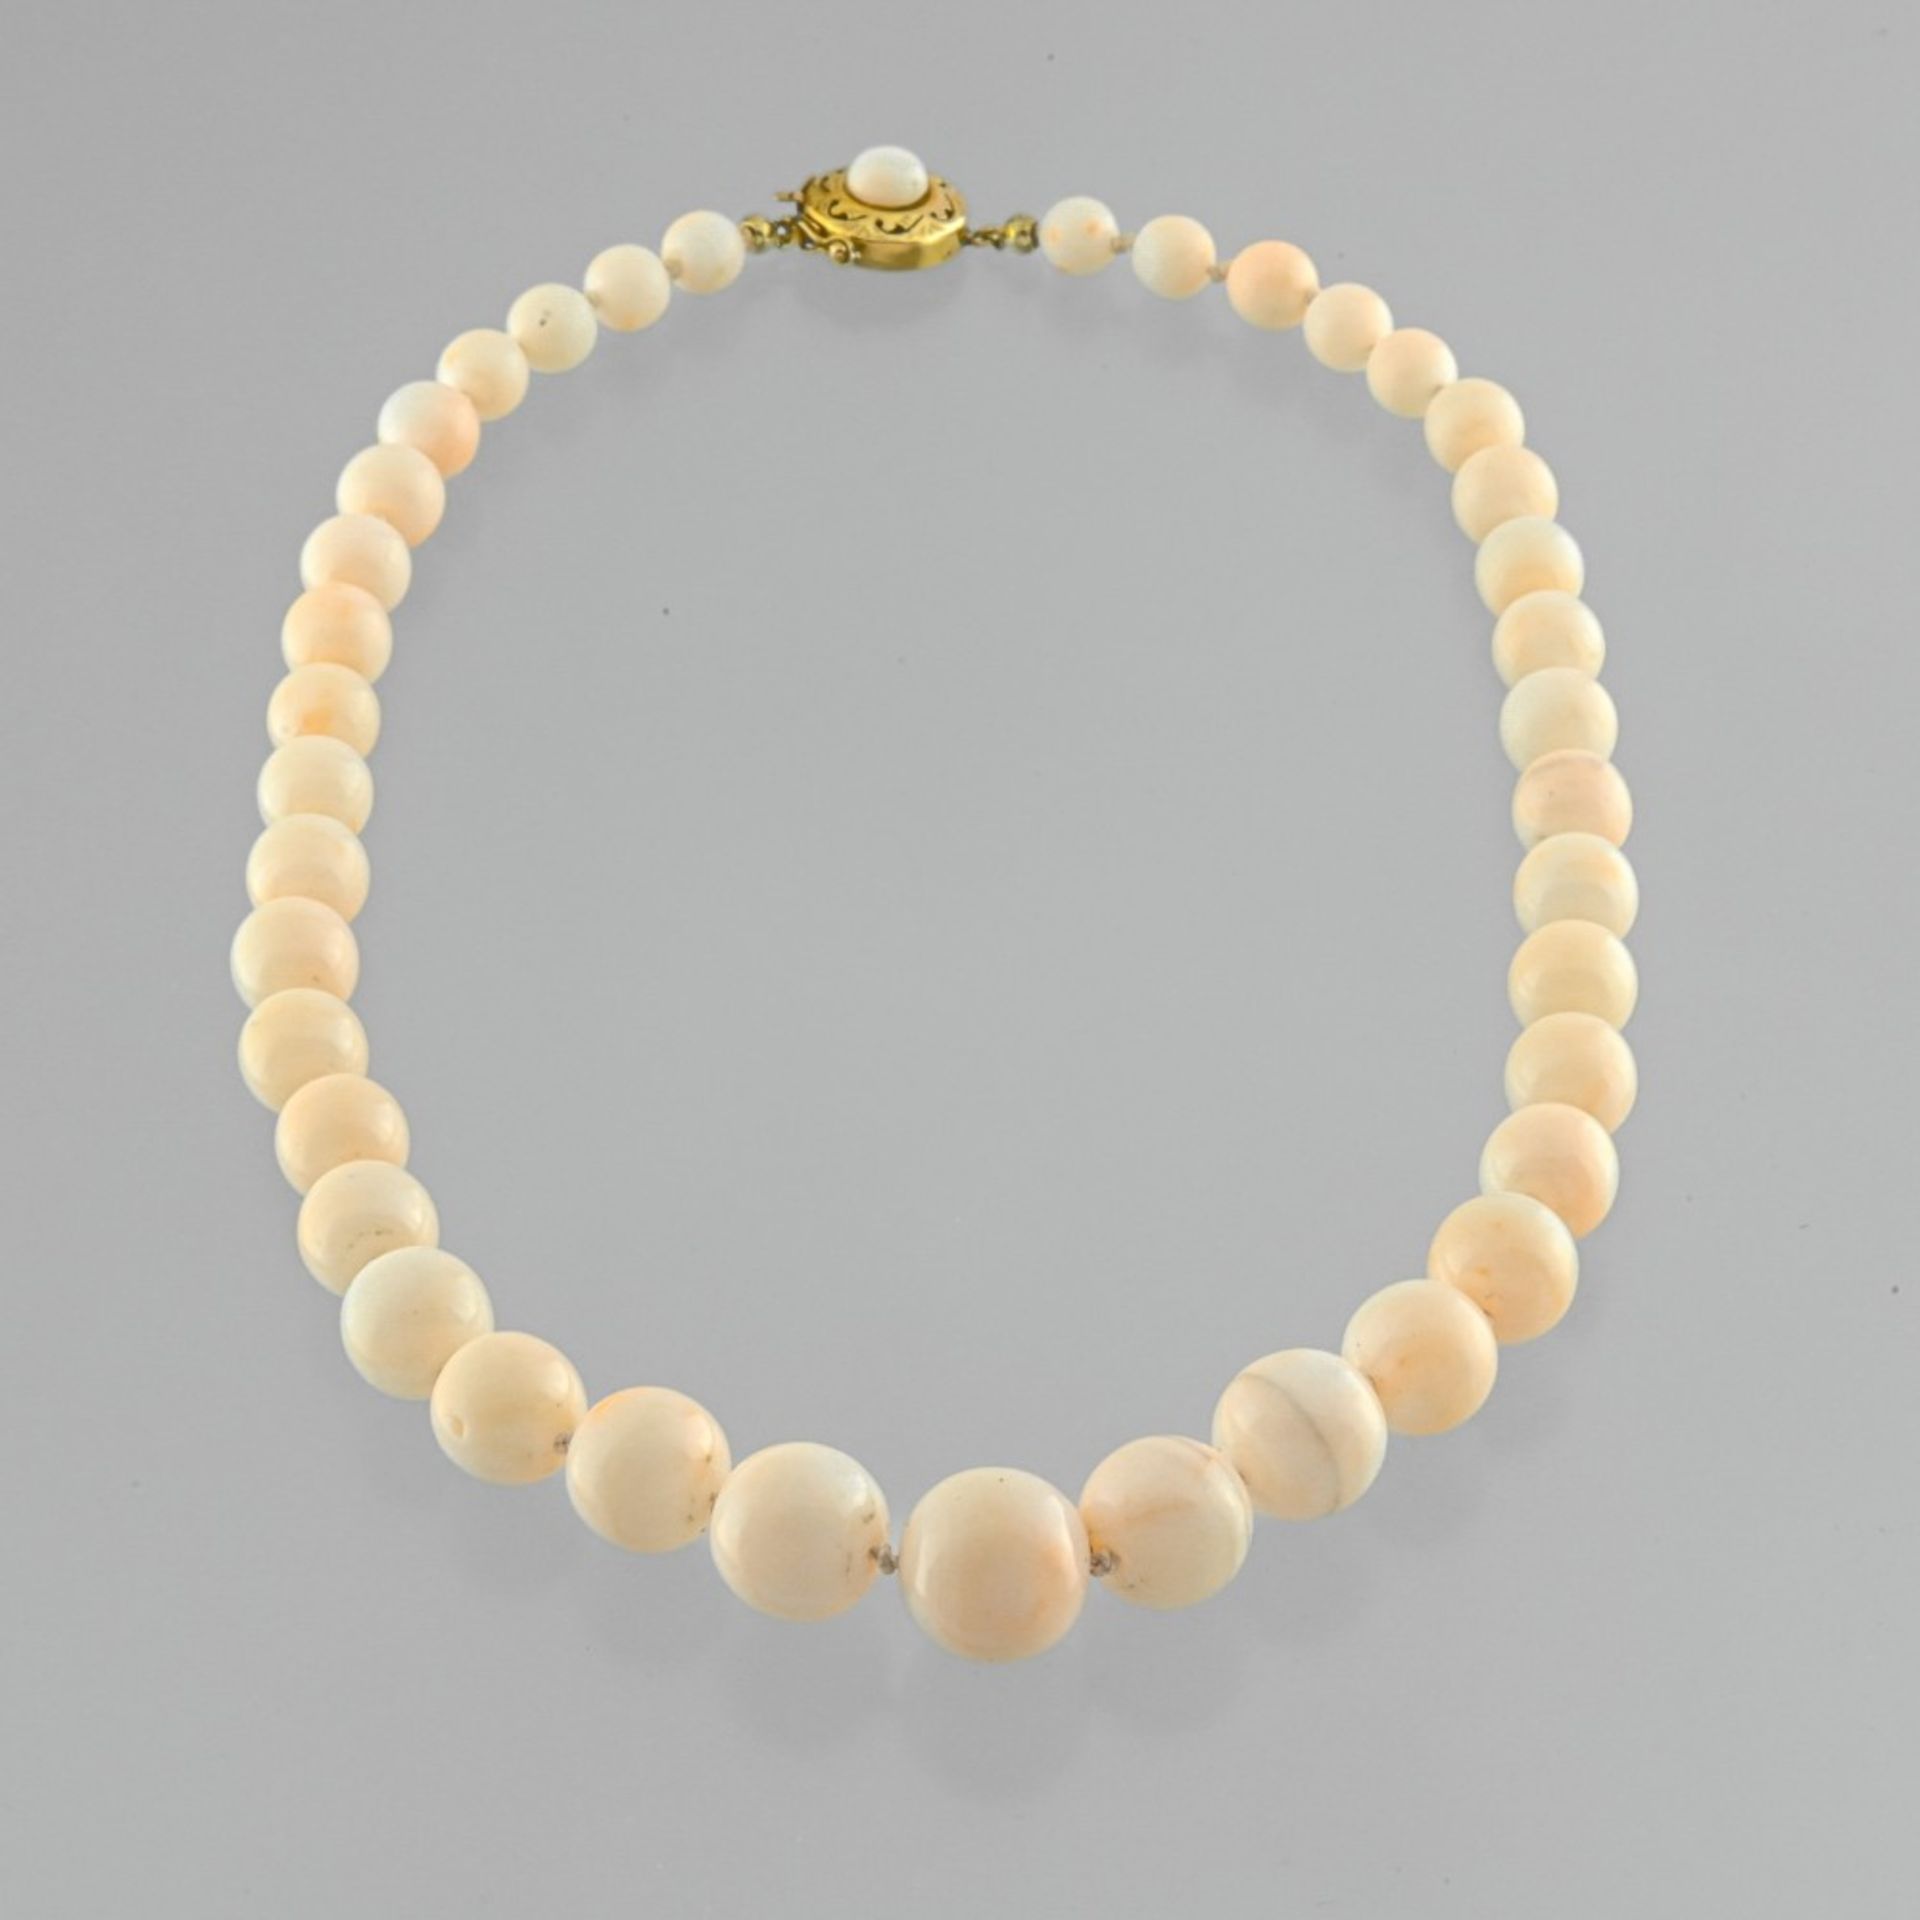 Angel skin coral necklace Necklace of coral pearls with 14 mm to 6,8 mm diameter, clasp openwork